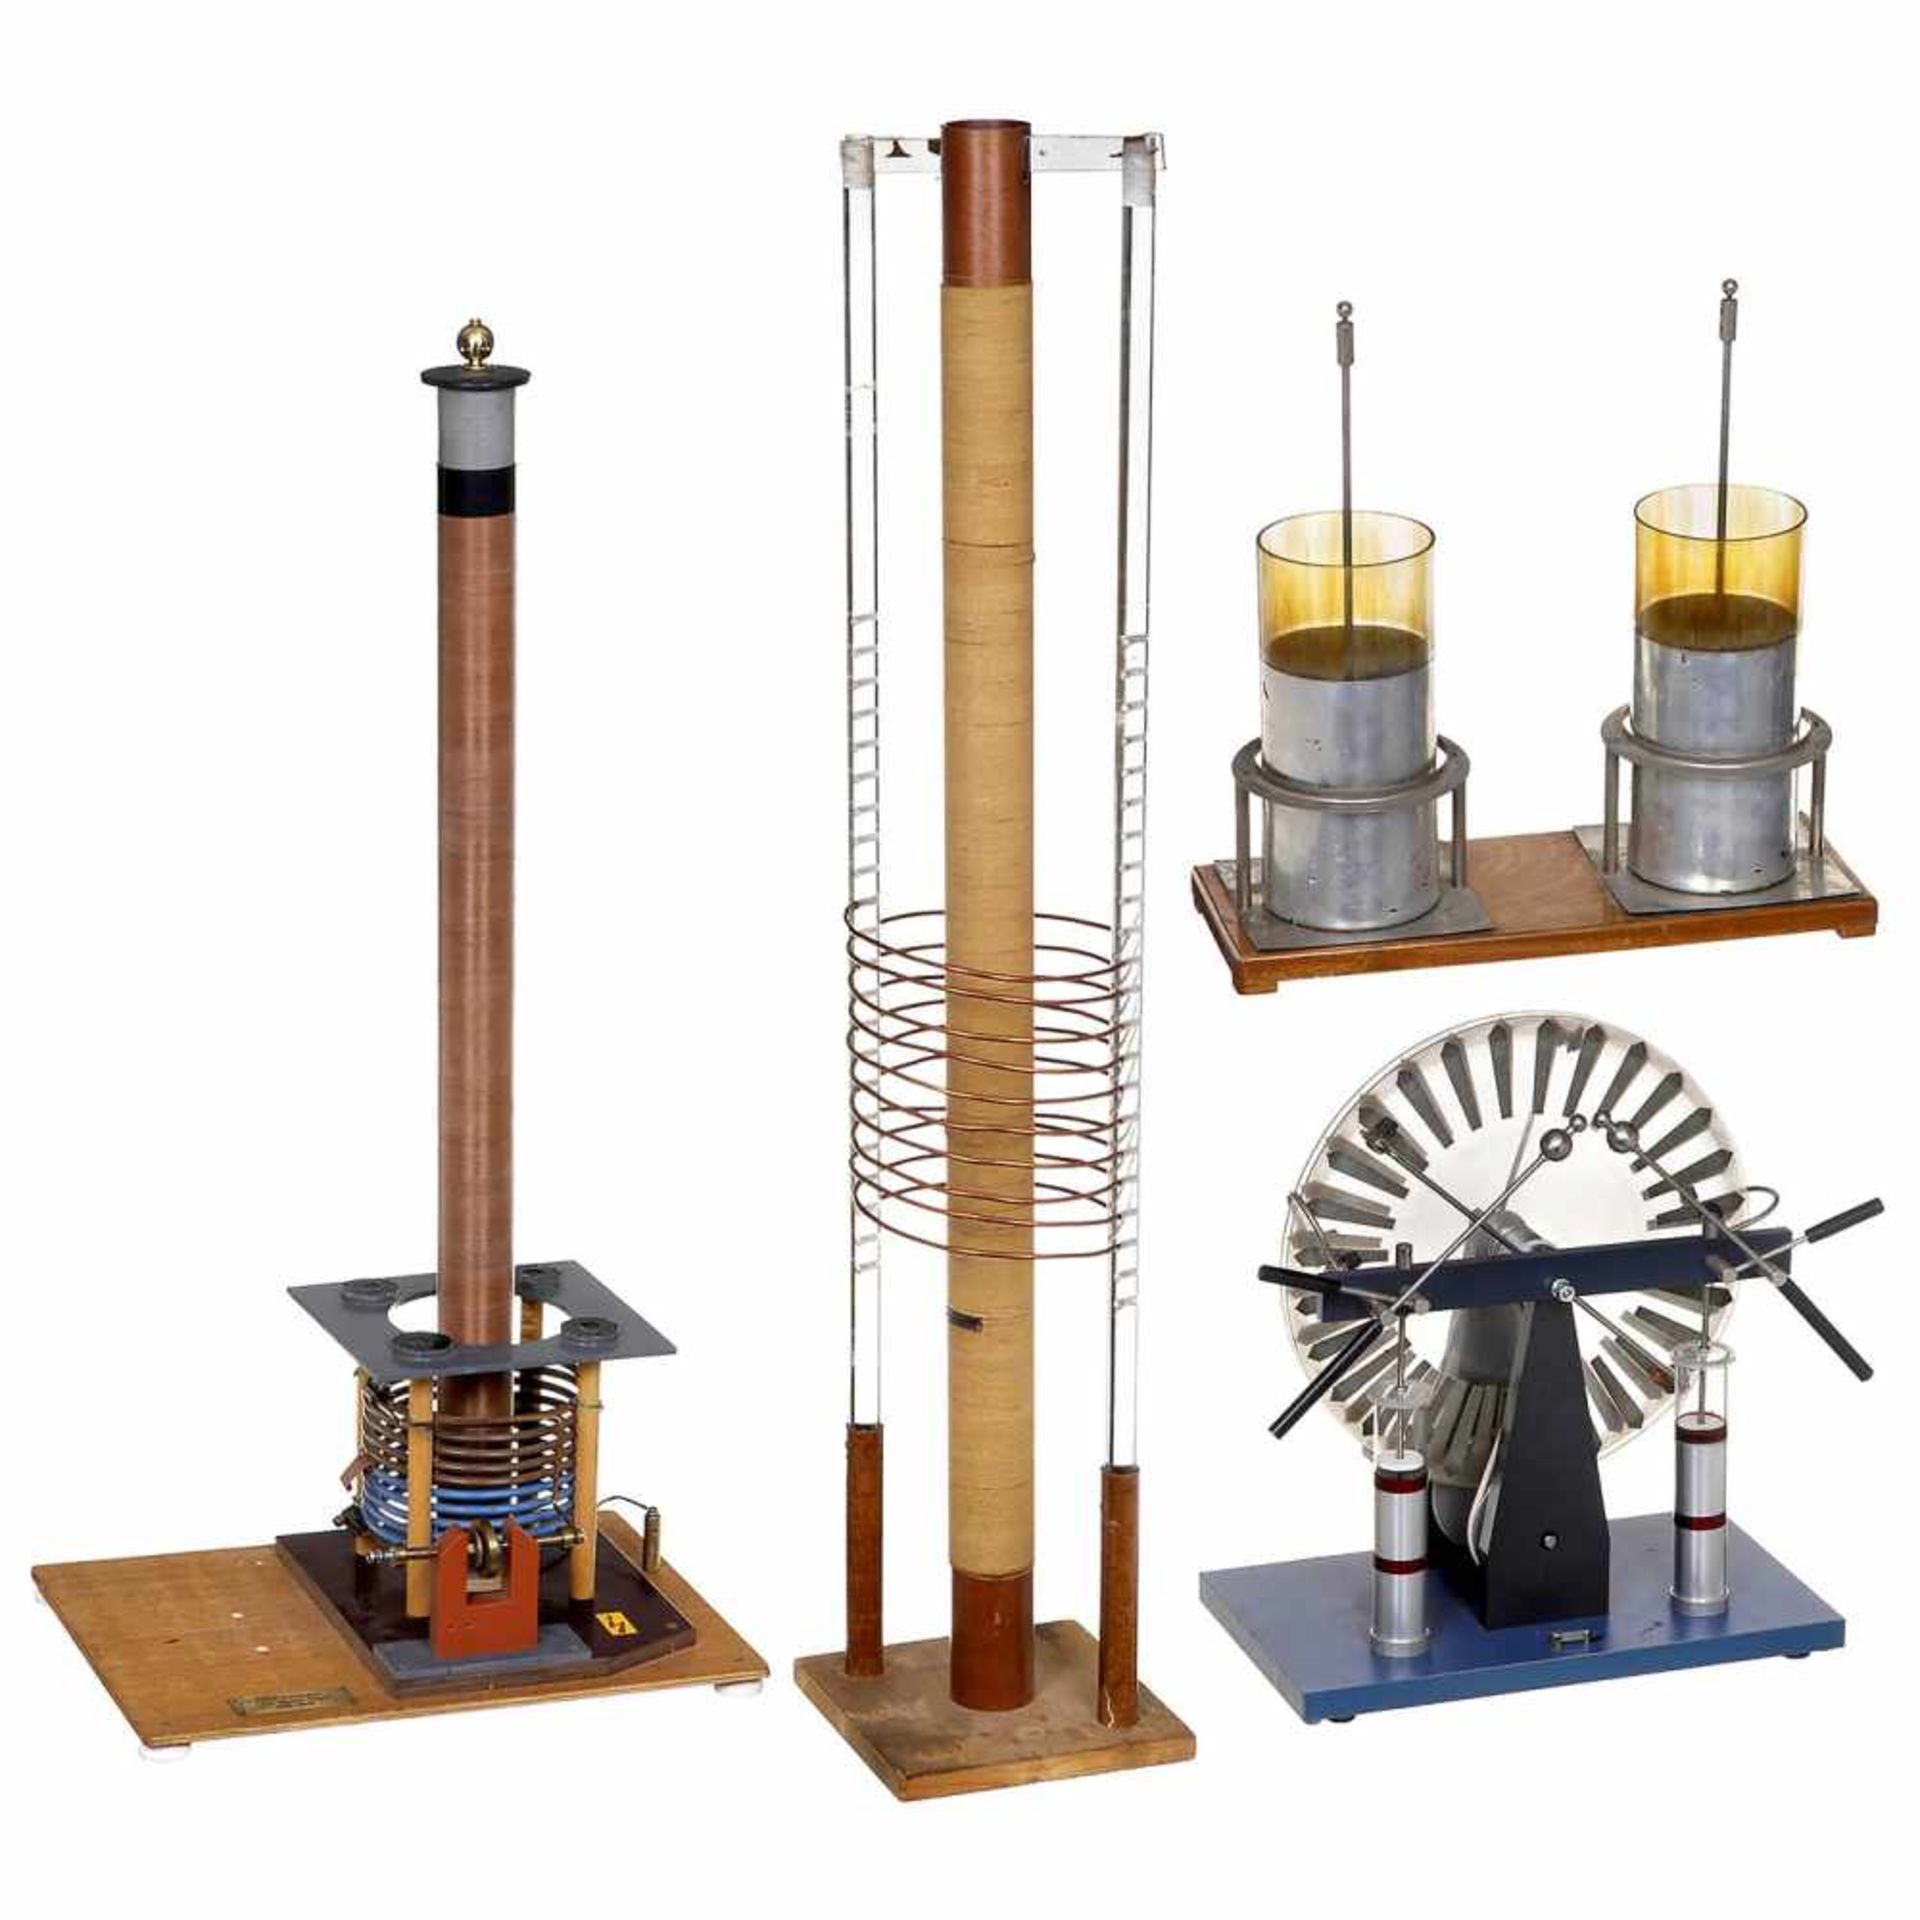 4 Physical Demonstration Instruments1) Tesla generator, 6 in. primary coil, 2 in. secondary coil,